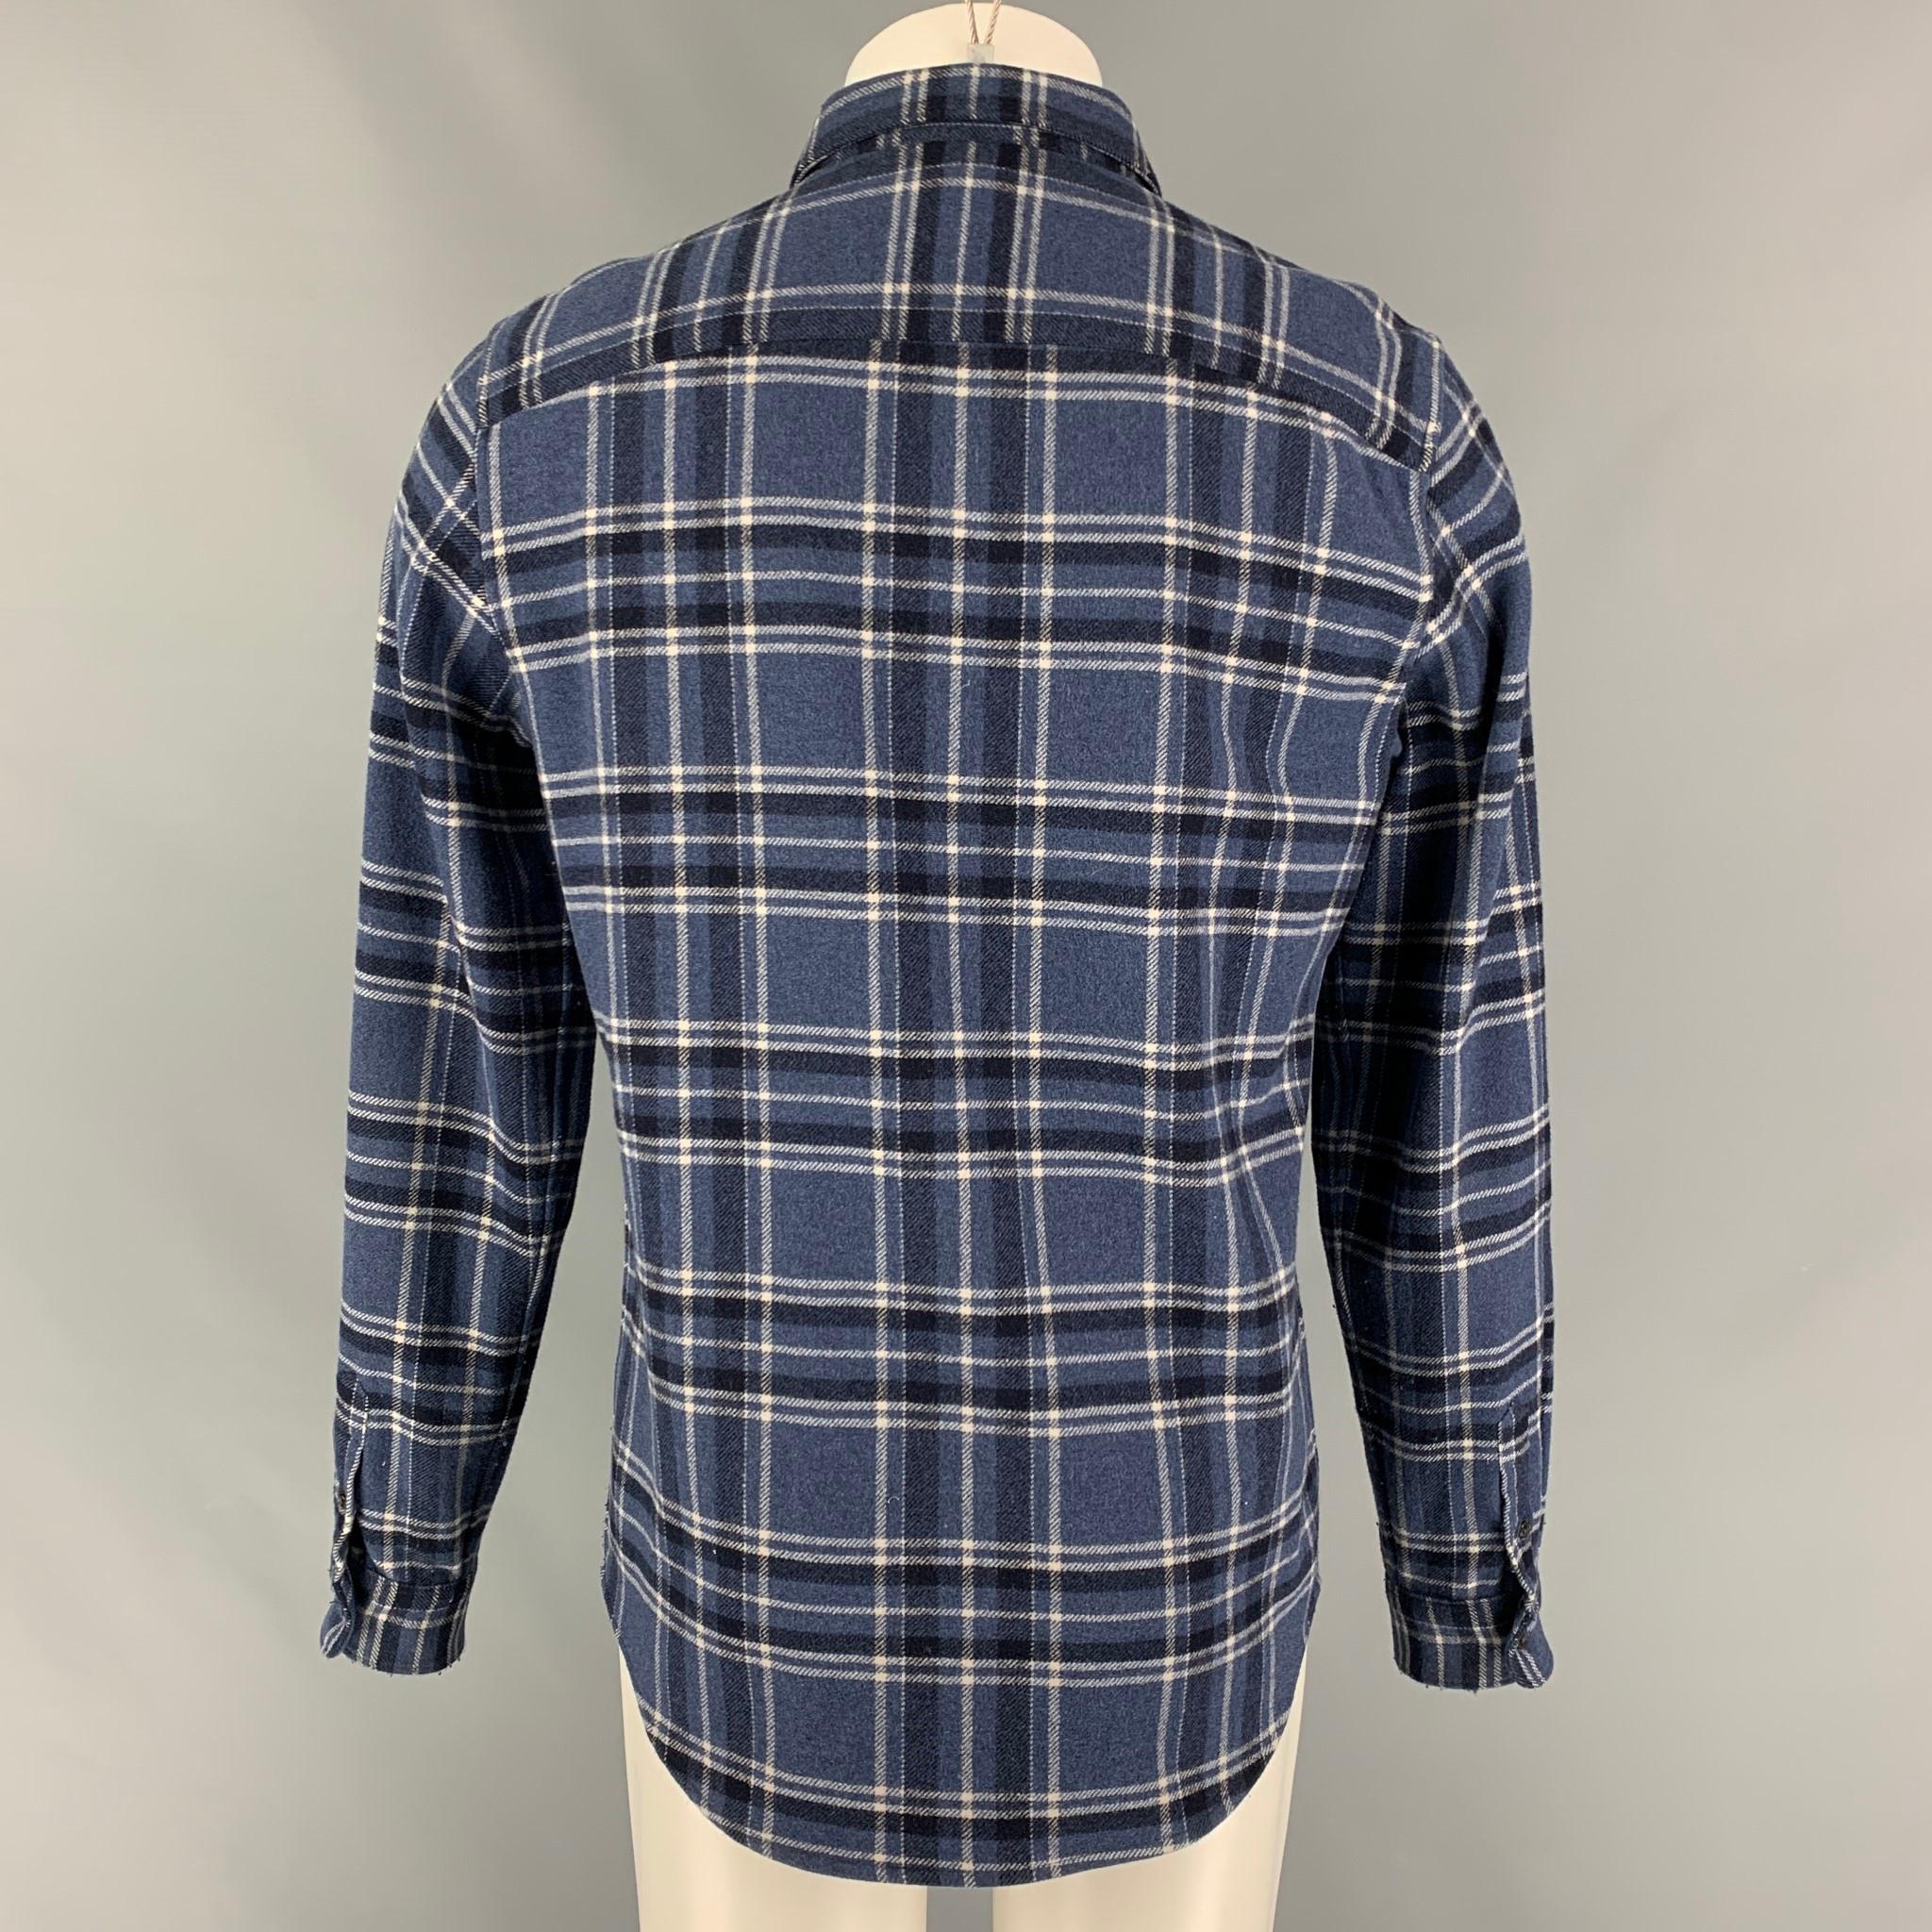 A.P.C long sleeve shirt comes in a blue & black plaid wool / nylon featuring a patch pocket, spread collar, and a button up closure. 

Very Good Pre-Owned Condition.
Marked: M
Original Retail Price: $136.00

Measurements:

Shoulder: 17.5 in.
Chest: